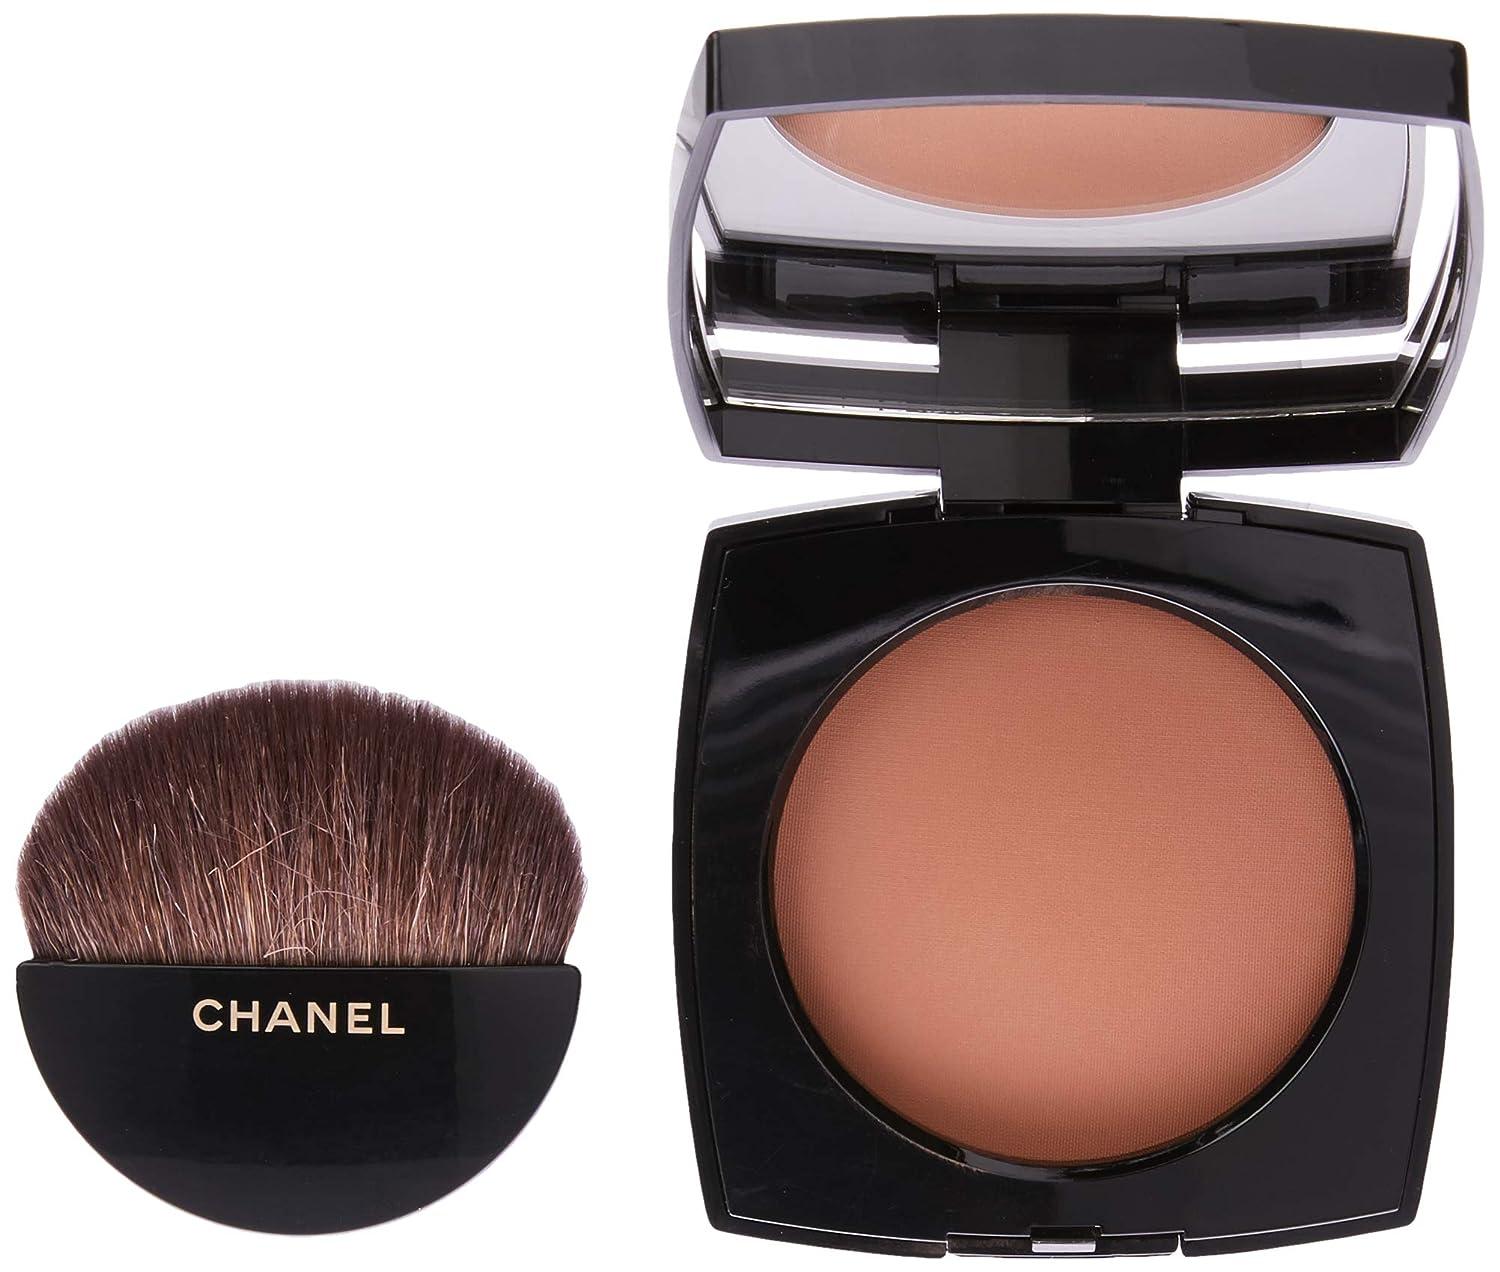 Chanel - Les Beiges Healthy Glow Sheer Powder SPF 15 - No. 60